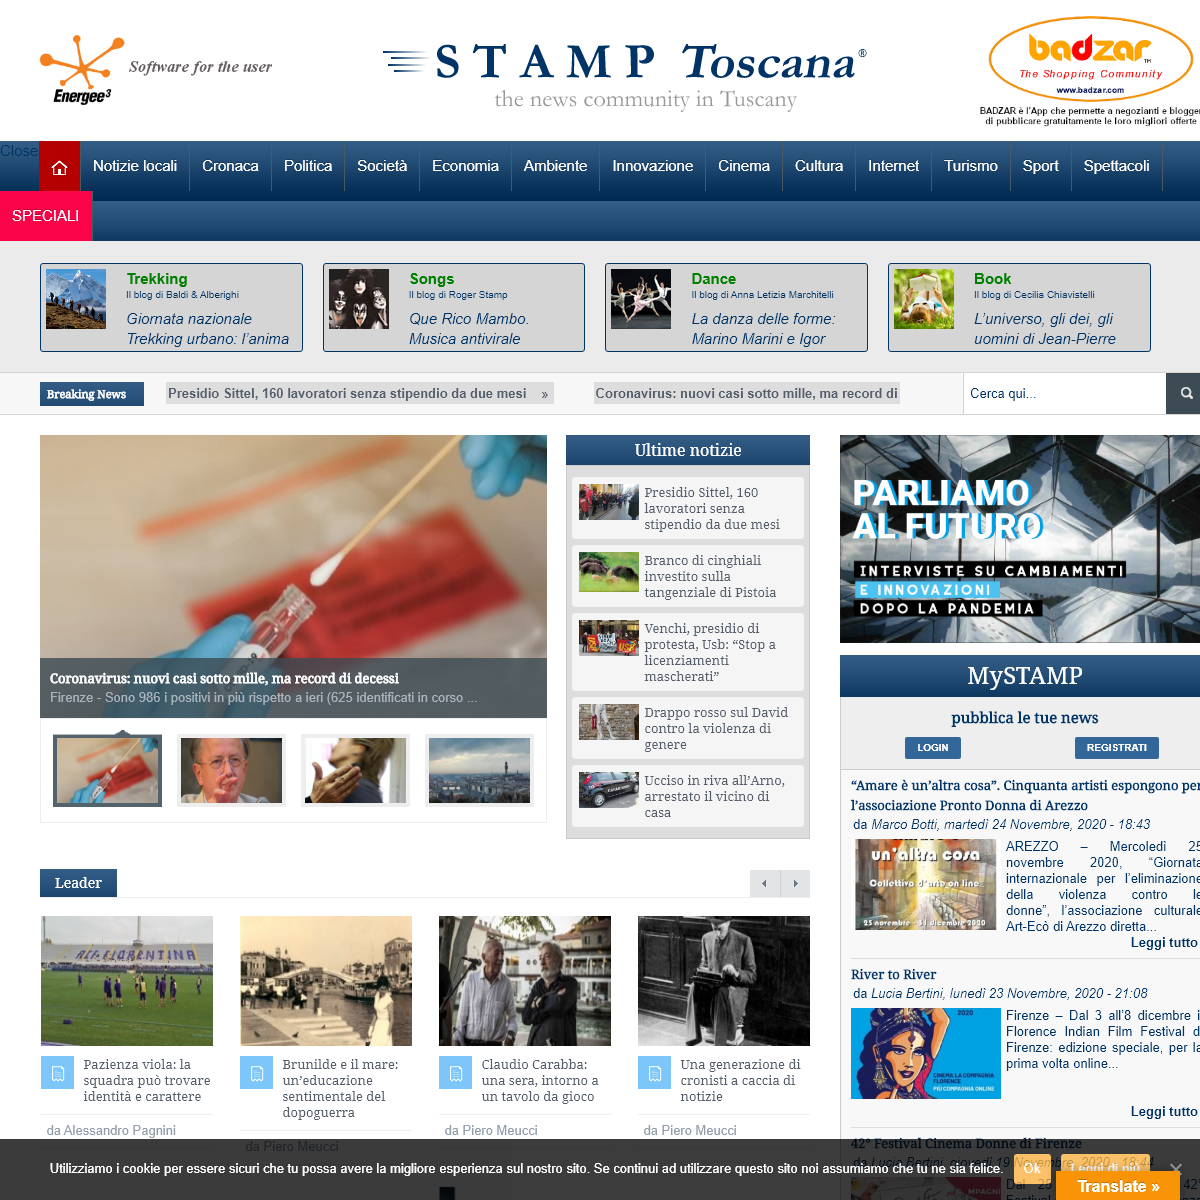 A complete backup of stamptoscana.it